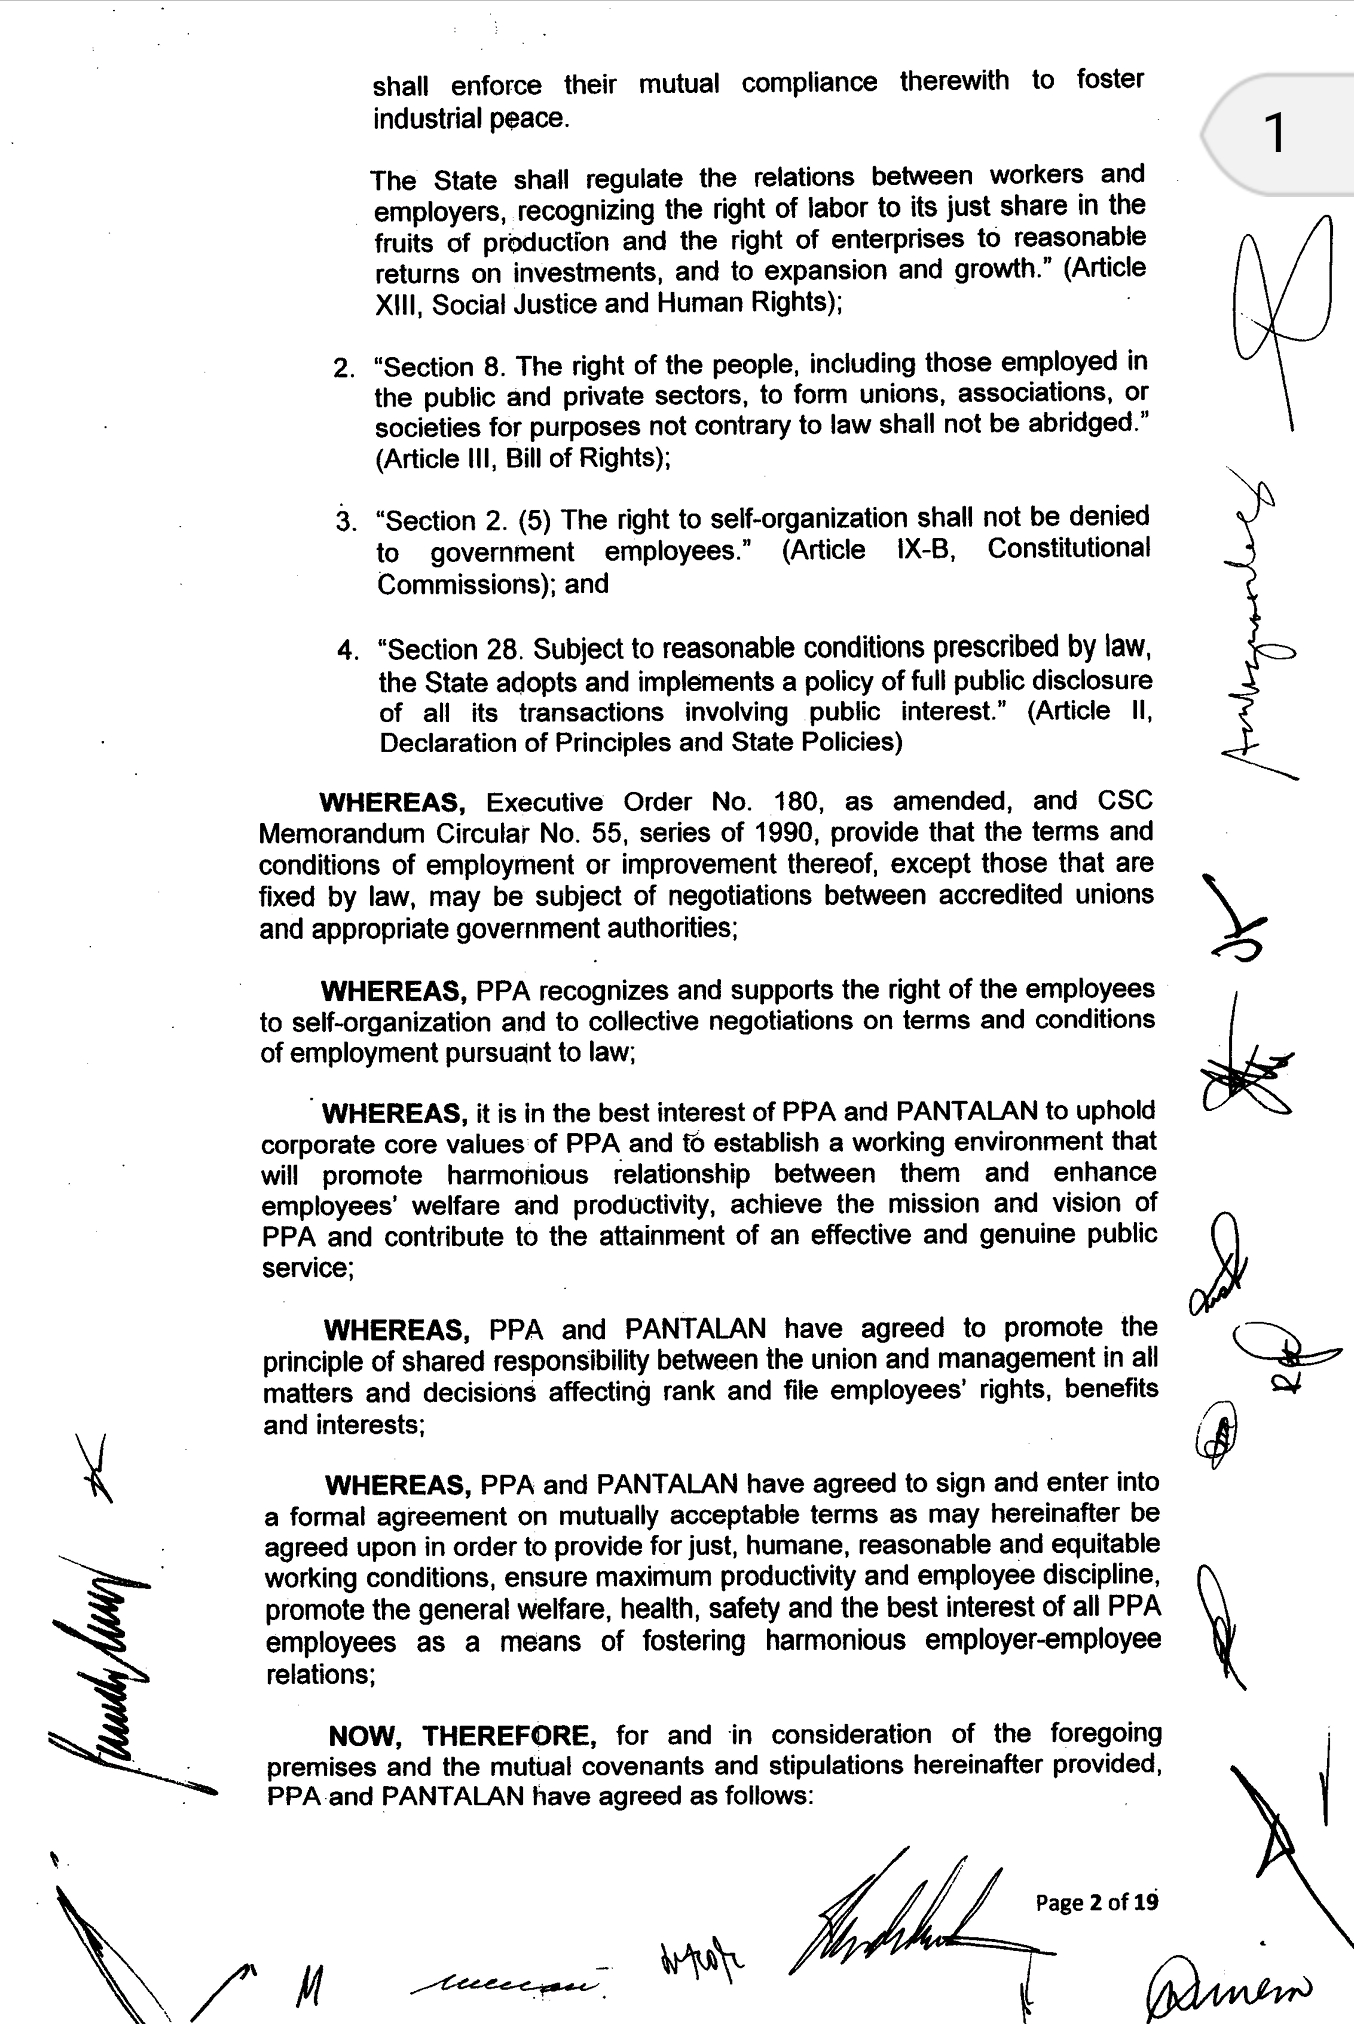 Negotiation And Agreement 6th Collective Negotiation Agreement Pantalan